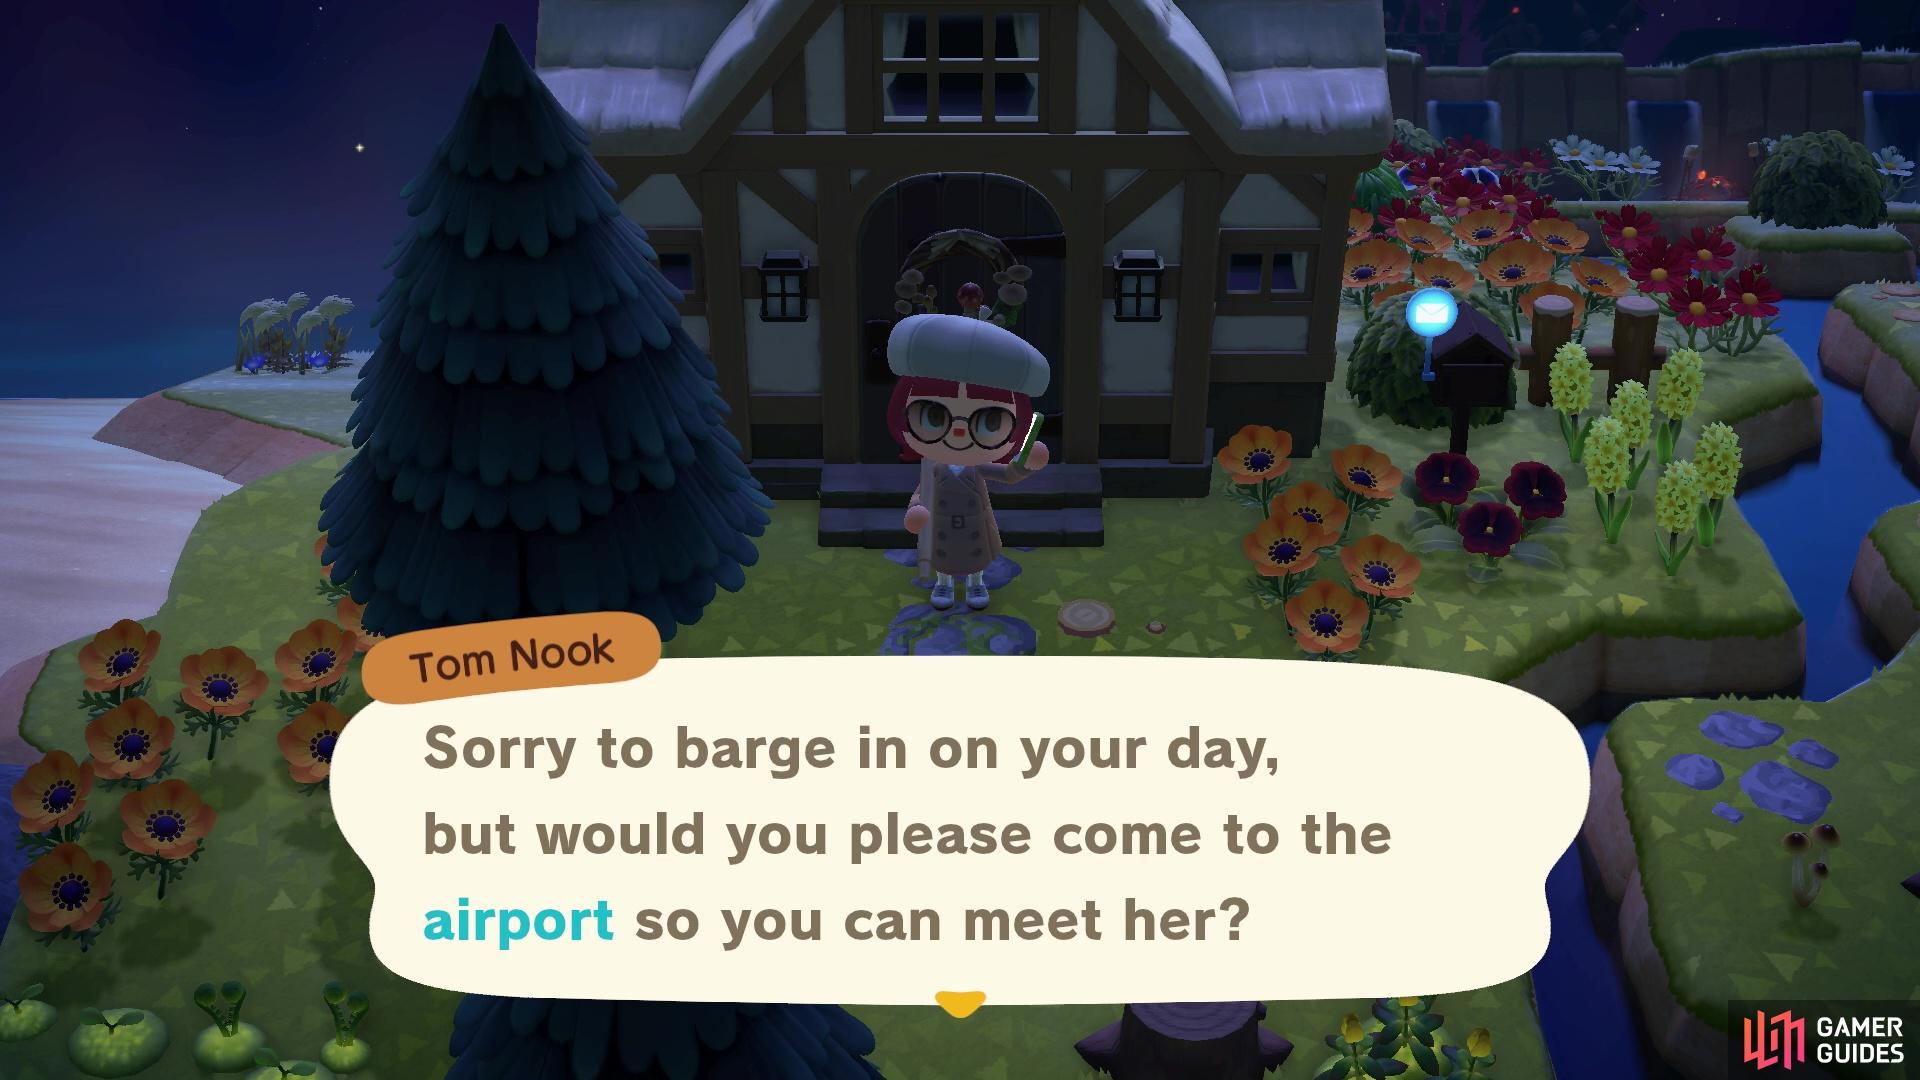 Nook will call you as soon as you open the game and ask you to meet him and his friend at the airport. 